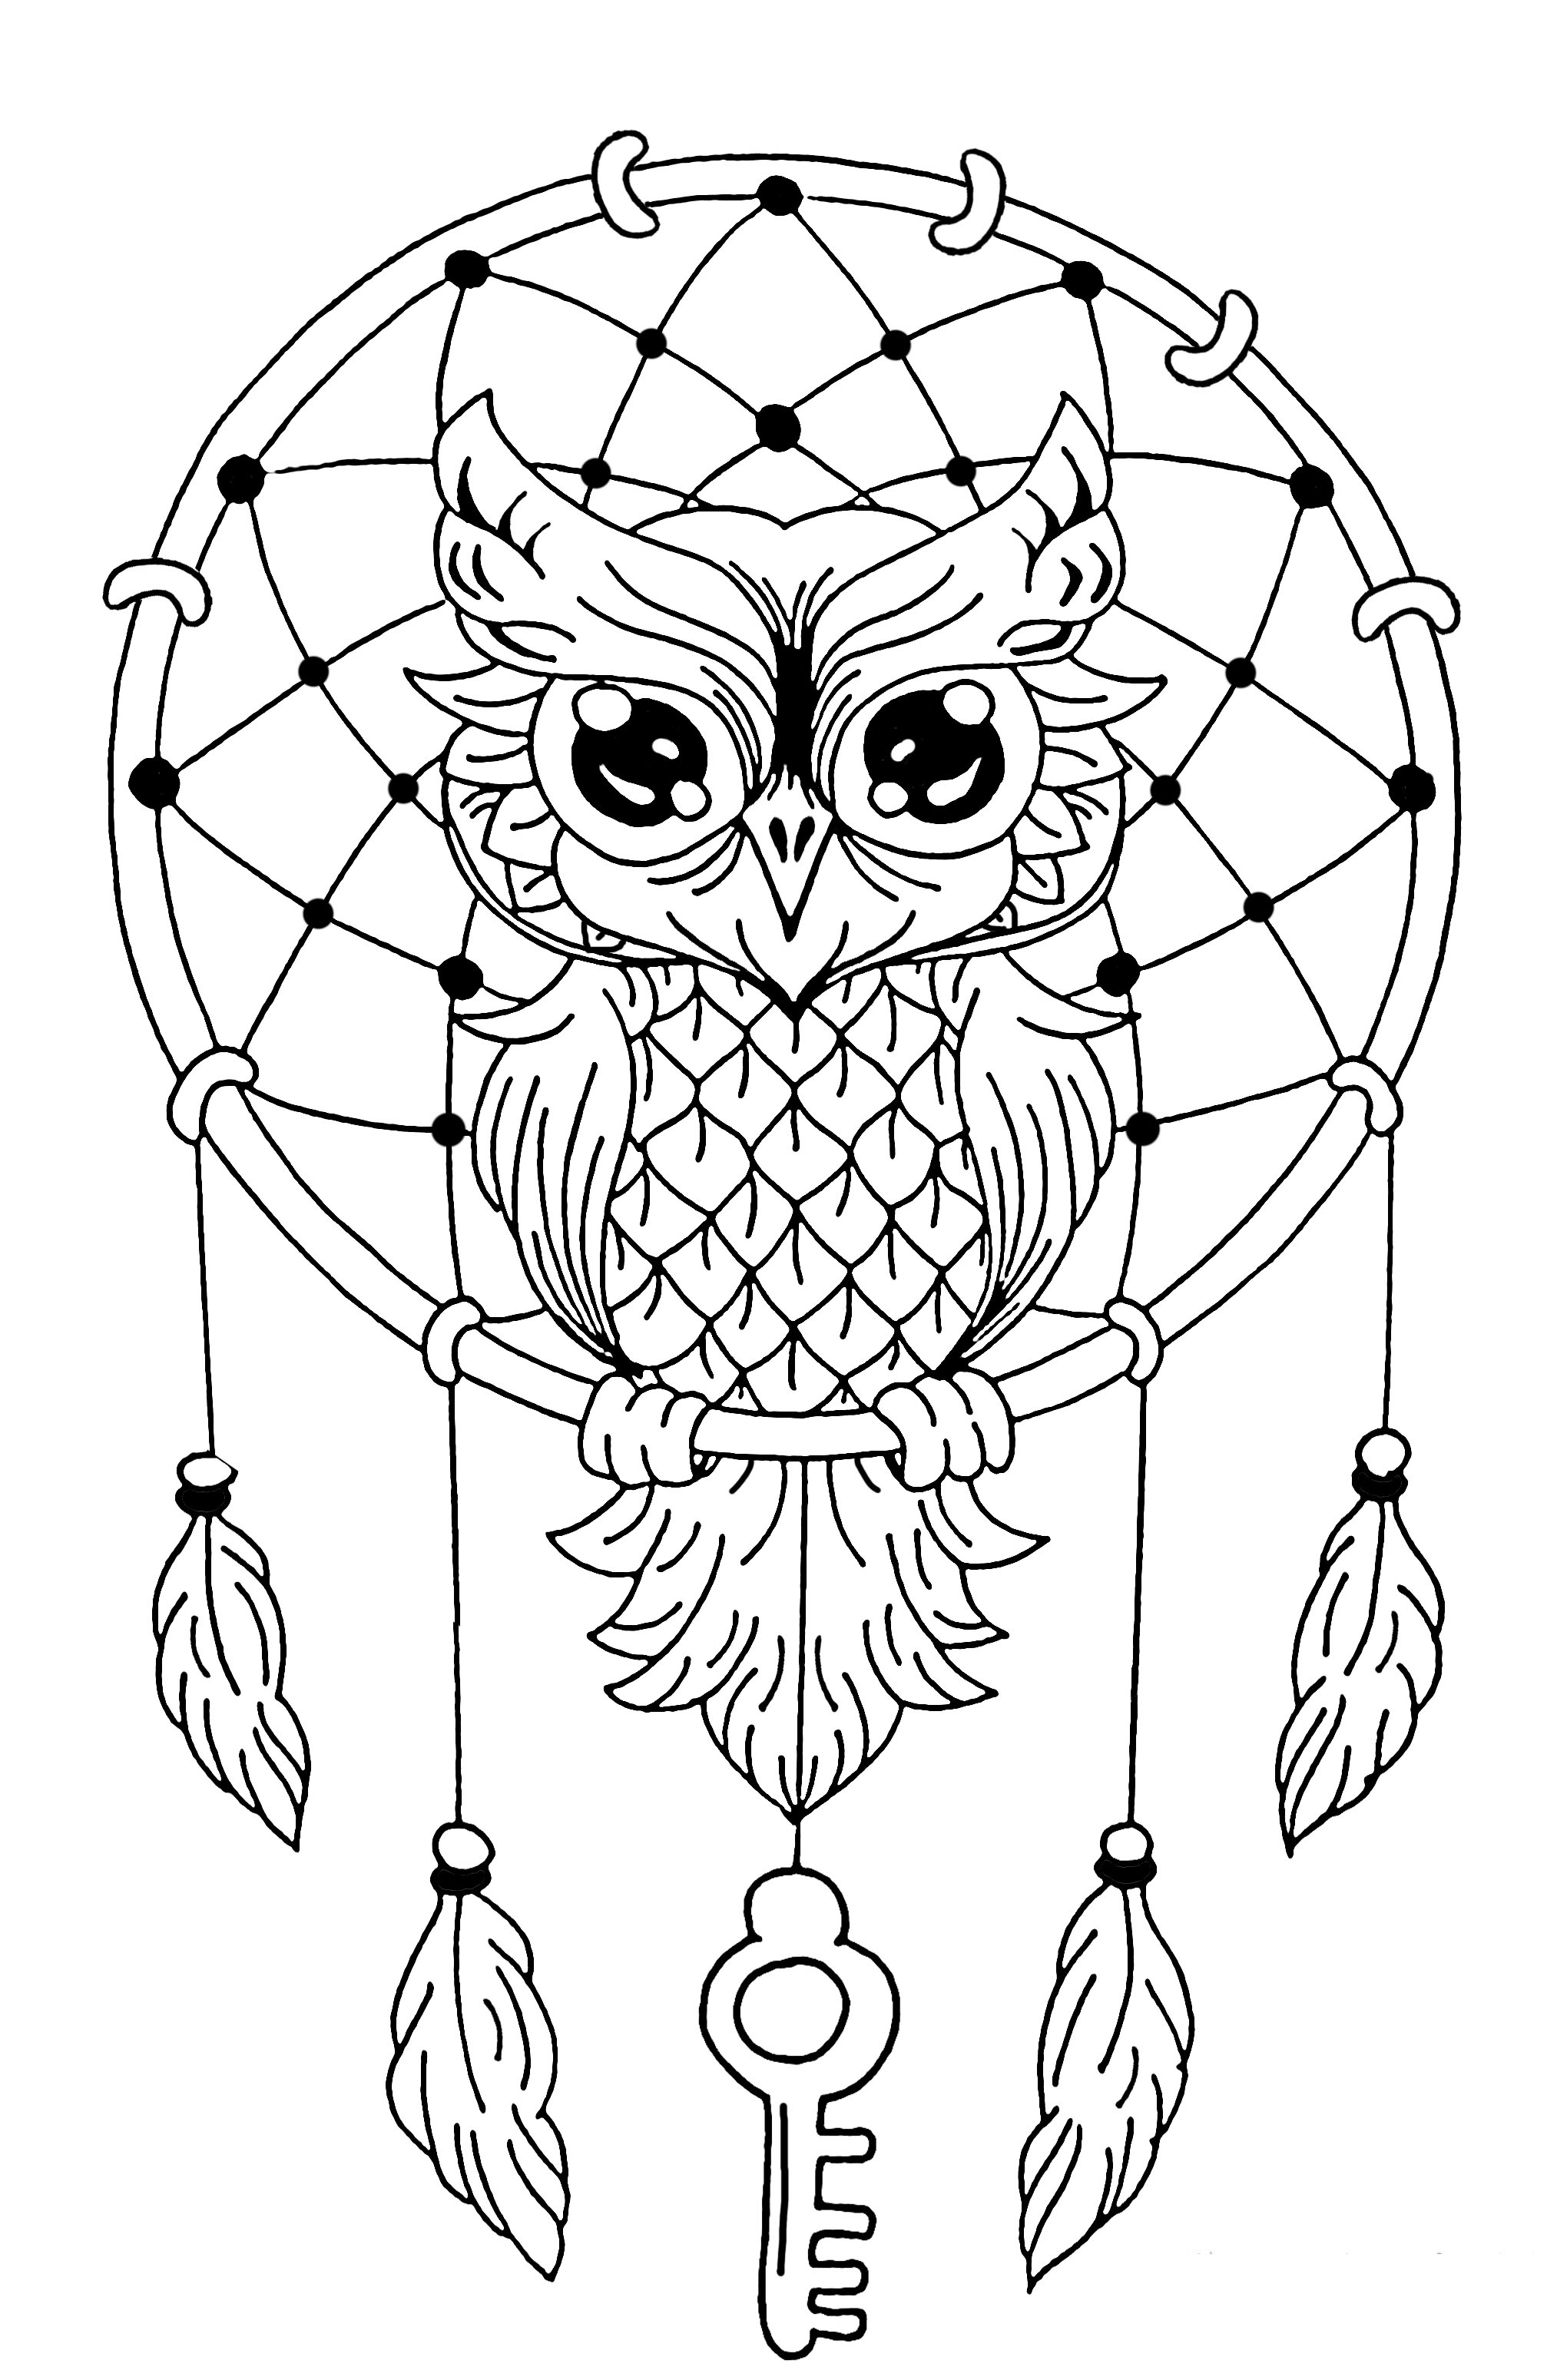 Dream Catcher Coloring Pages Best Coloring Pages For Kids